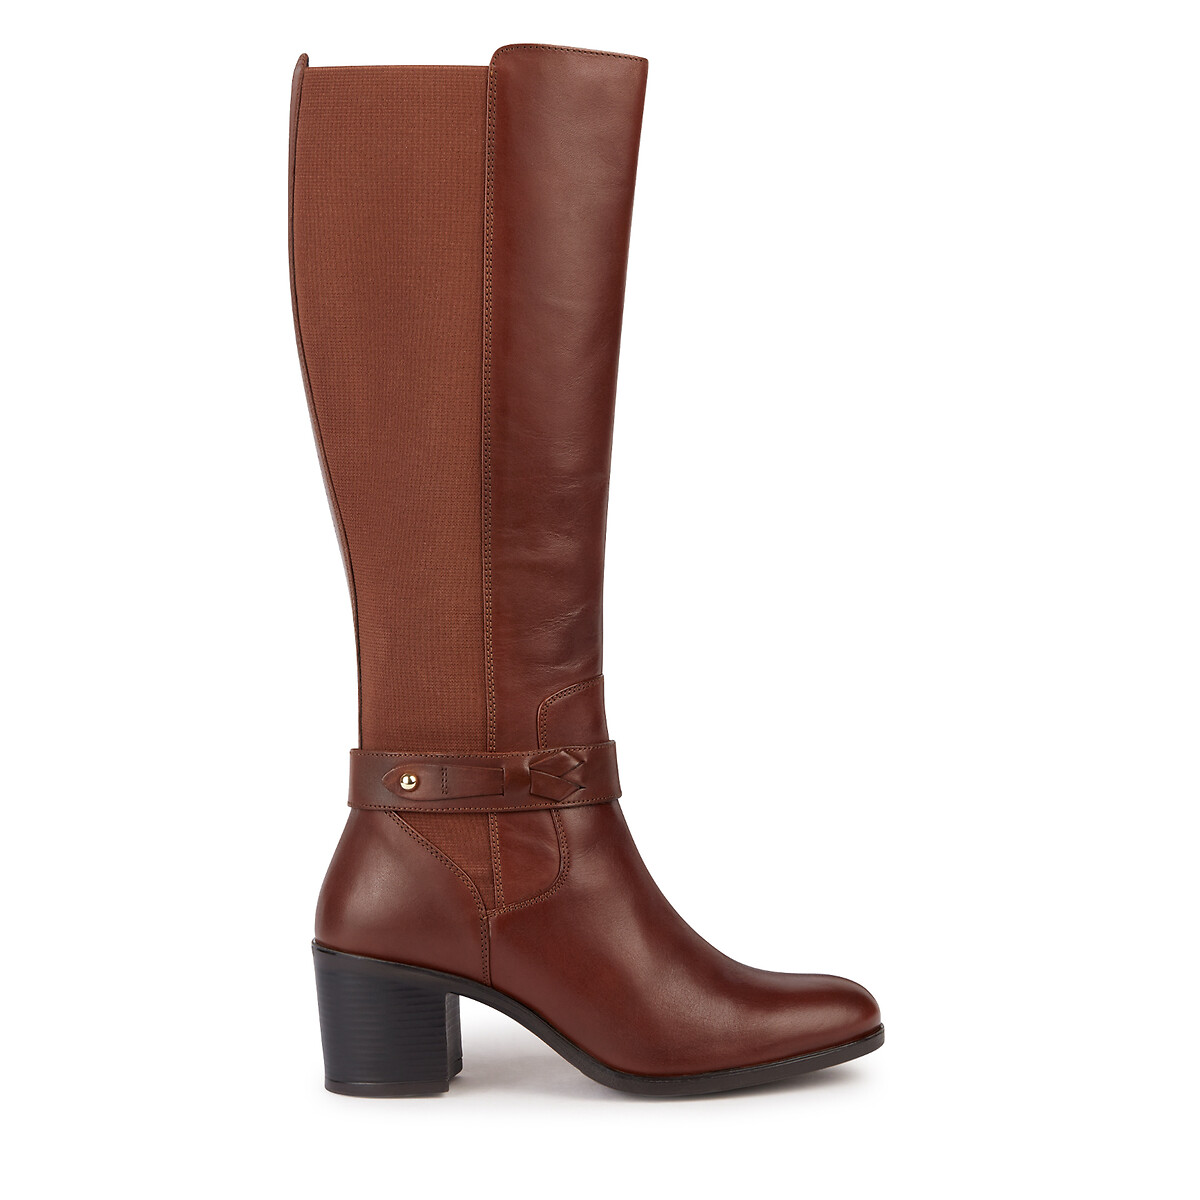 New asheel knee-high boots with block heel in leather Geox | La Redoute